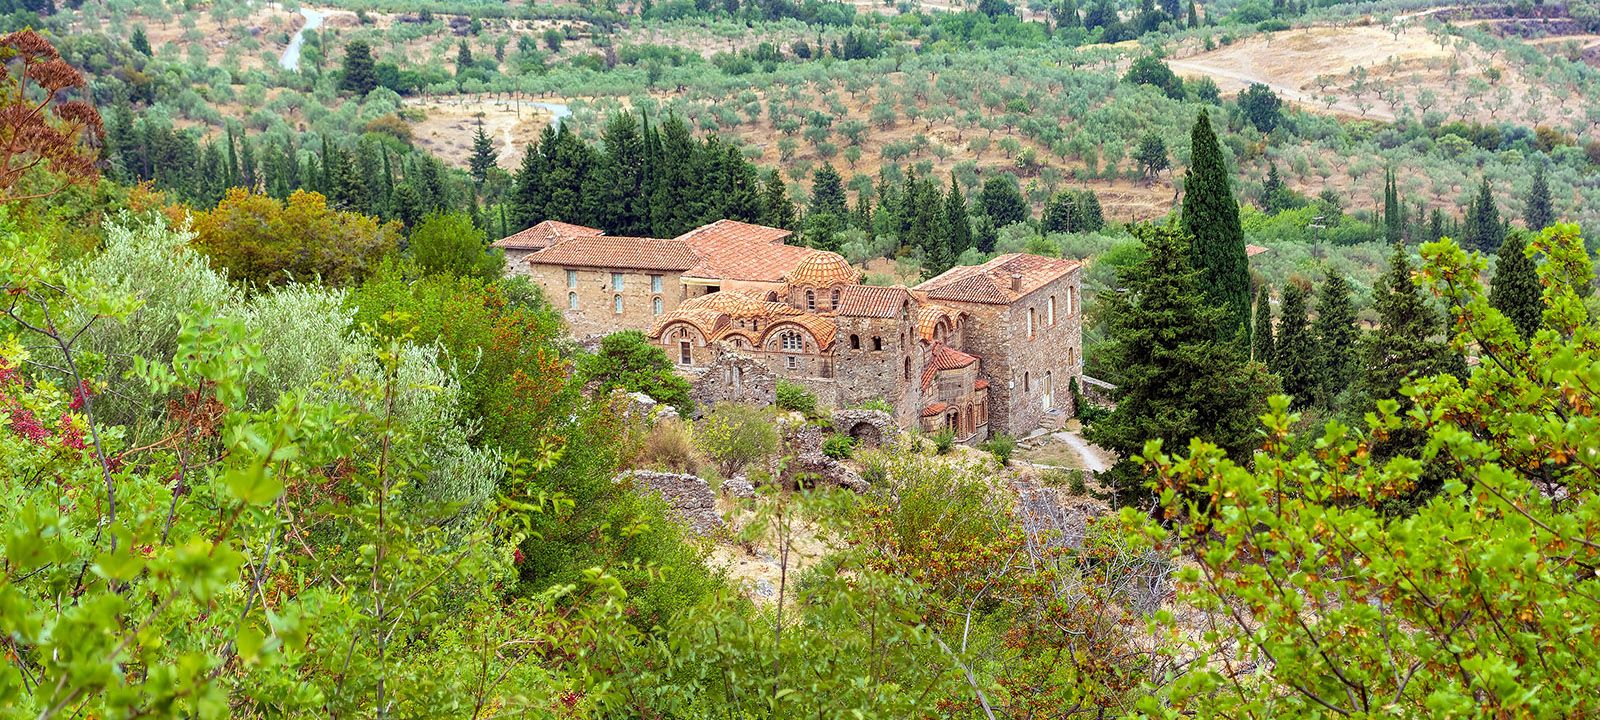 The Peloponnese destination for an excursion with Greek Adventures